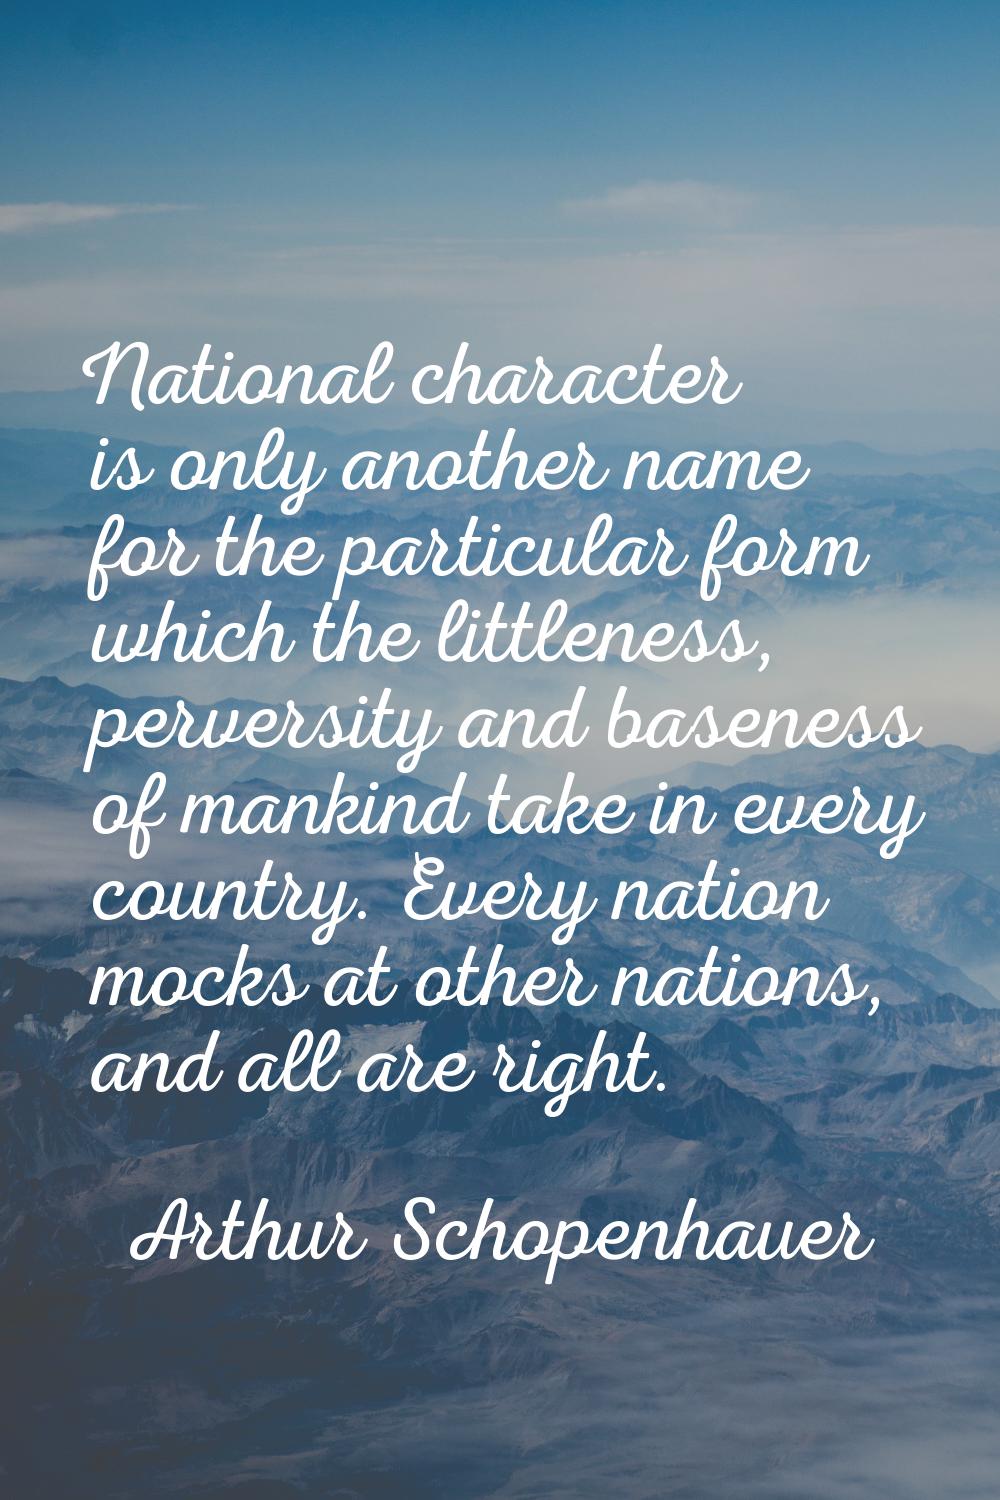 National character is only another name for the particular form which the littleness, perversity an